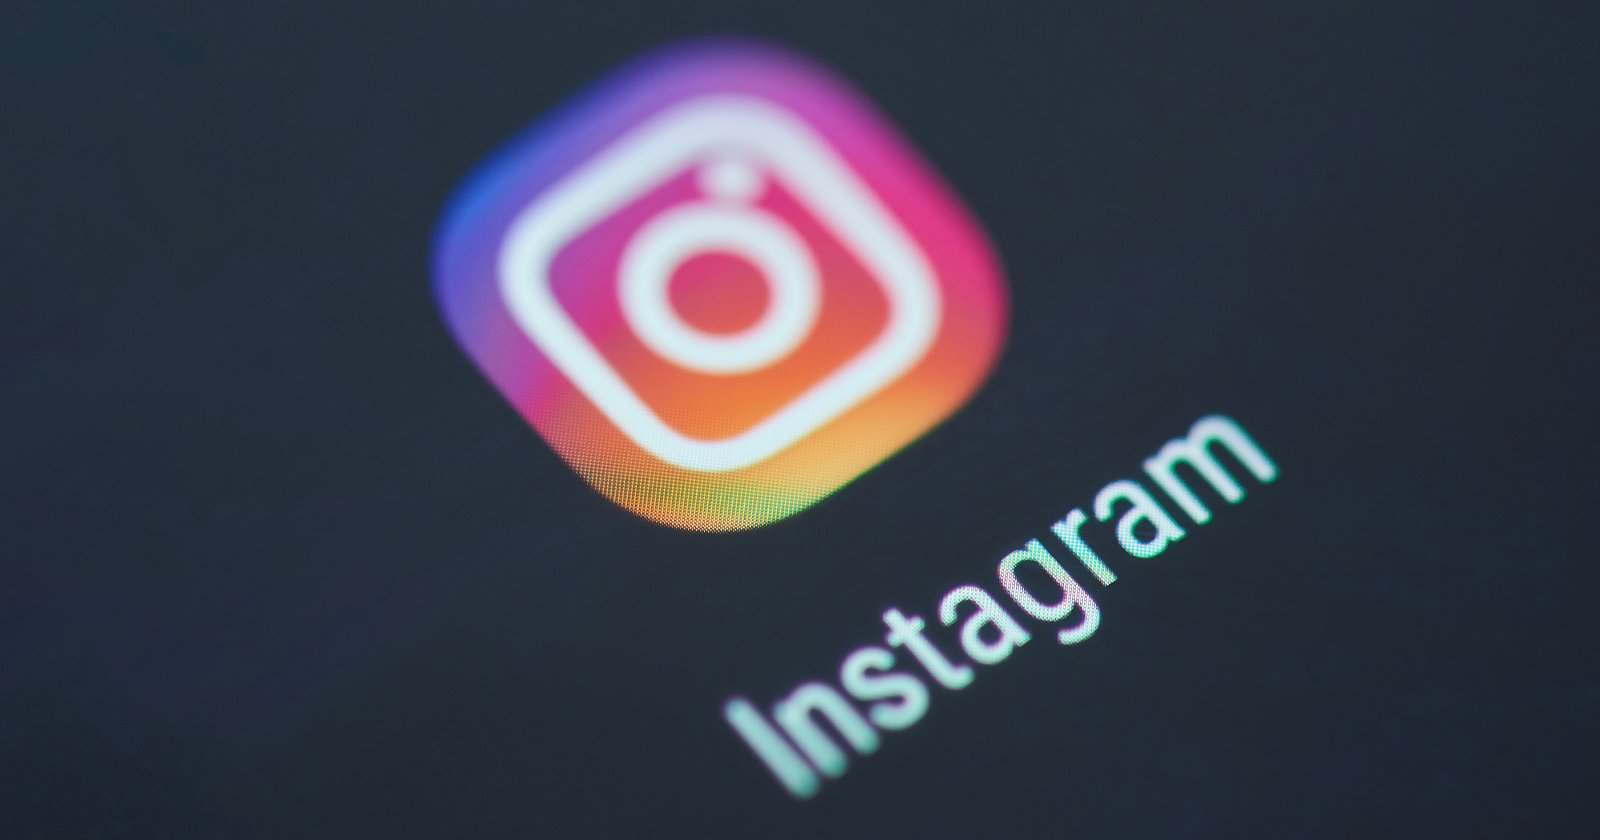 How to Customize Your Favorites Feed on Instagram